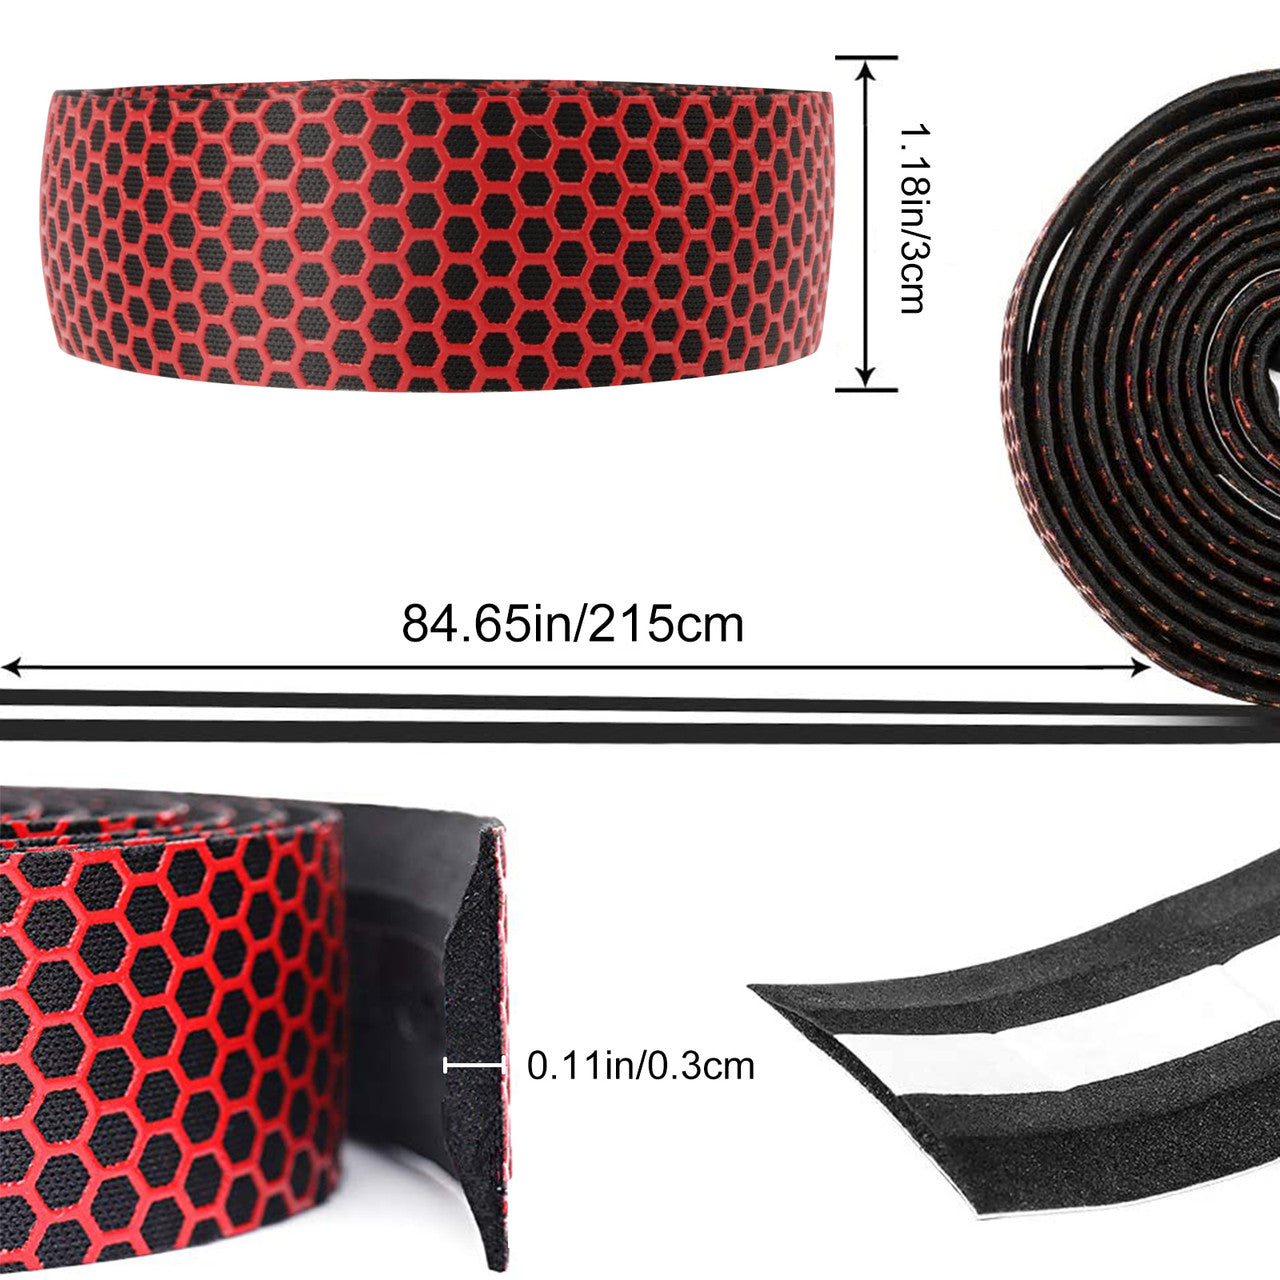 Honeycomb Silicone Handle for Bicycles with Quick Drying Characteristics, Red